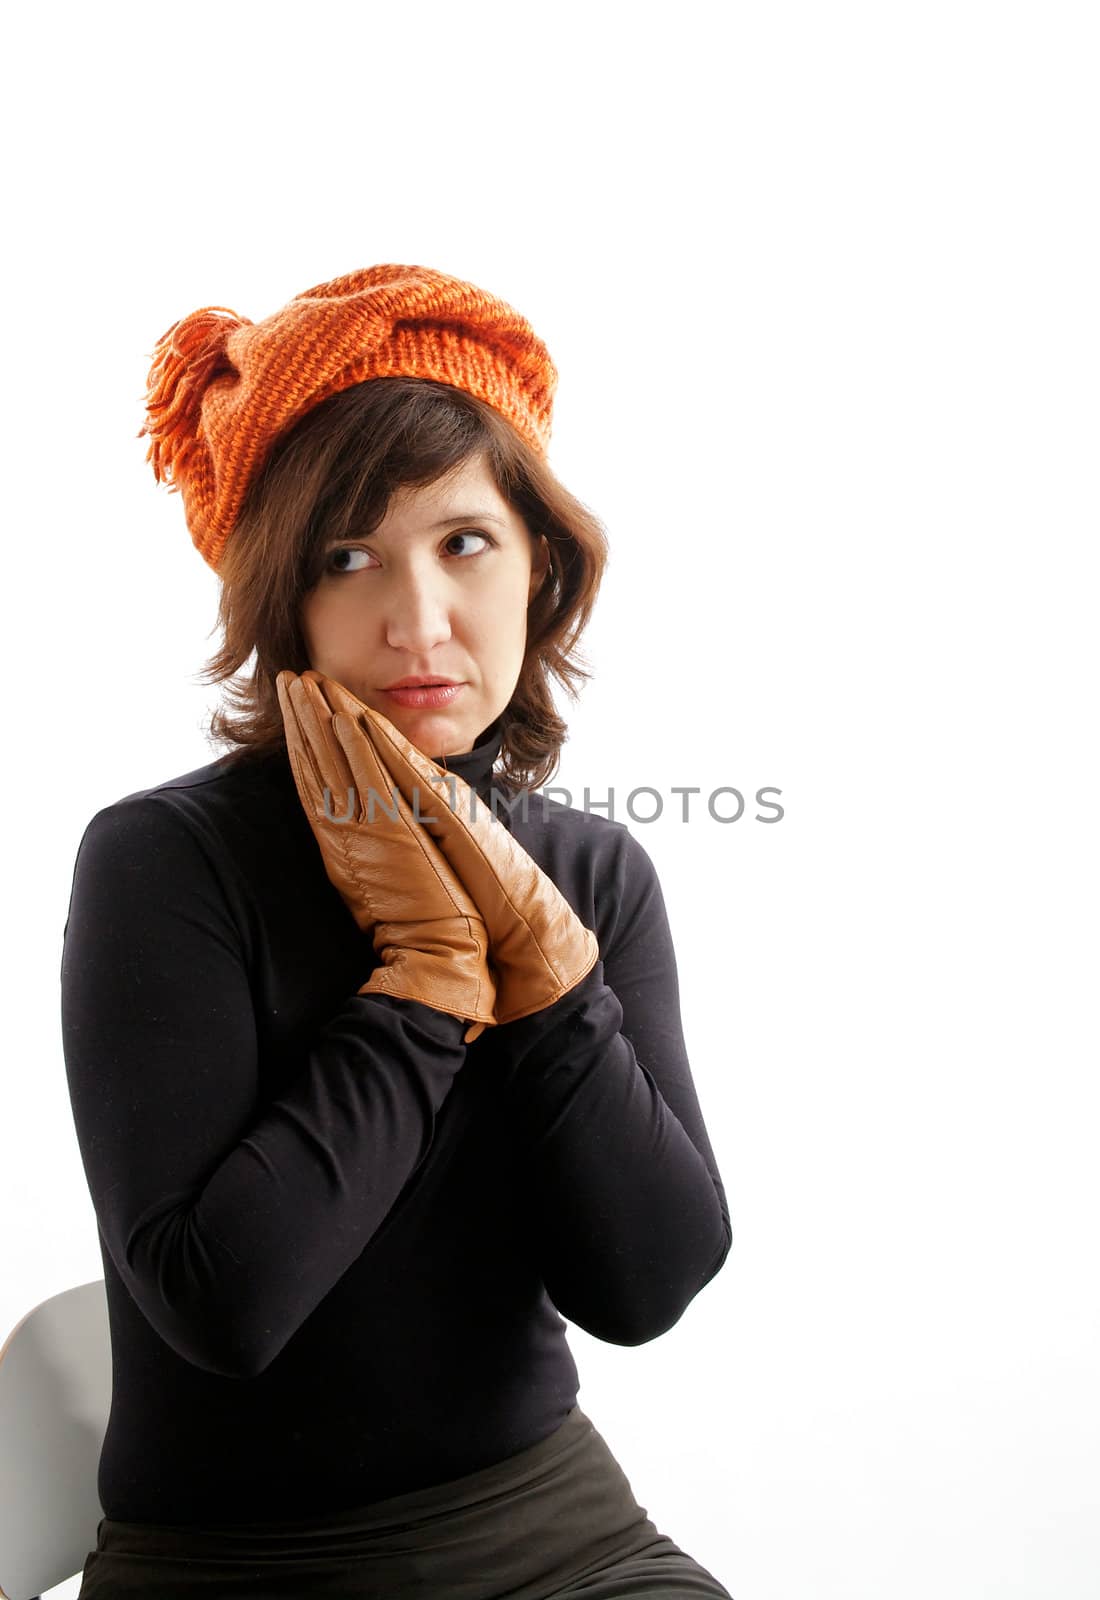 Young Attractive Woman Sitting in Knitting Hat and Gloves and Asks "Where is my Fur Coat?"